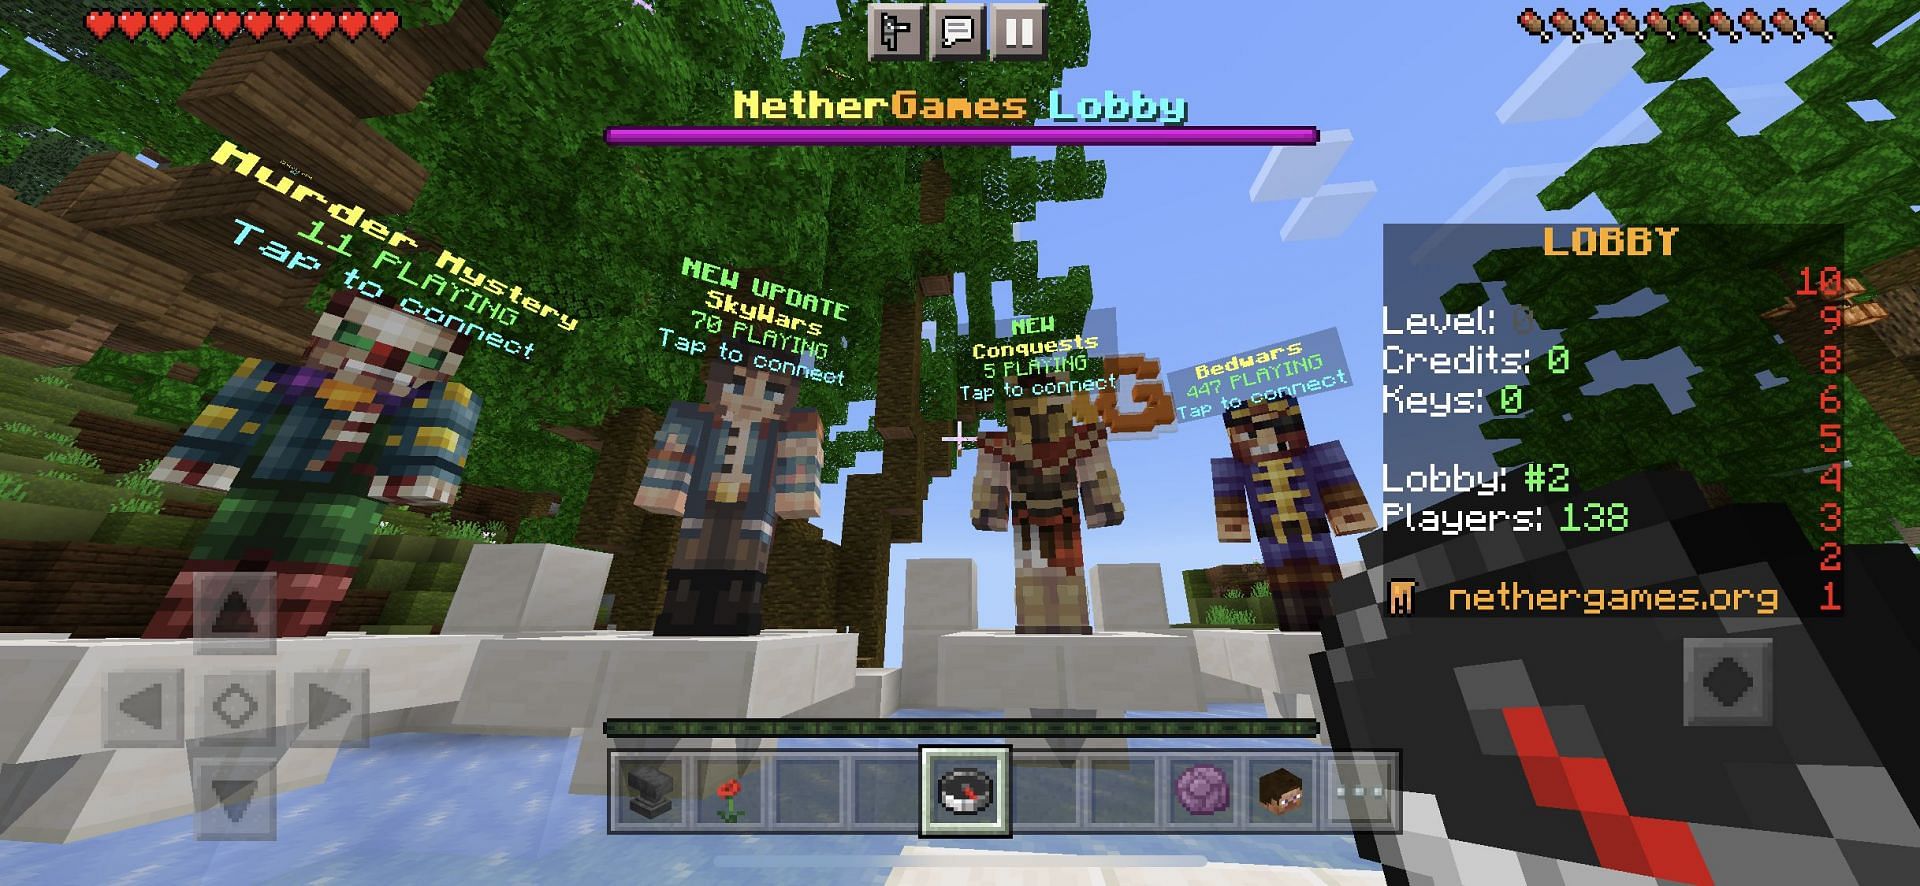 NetherGames is one of the best Pocket Edition servers. (image credits: NetherGames)